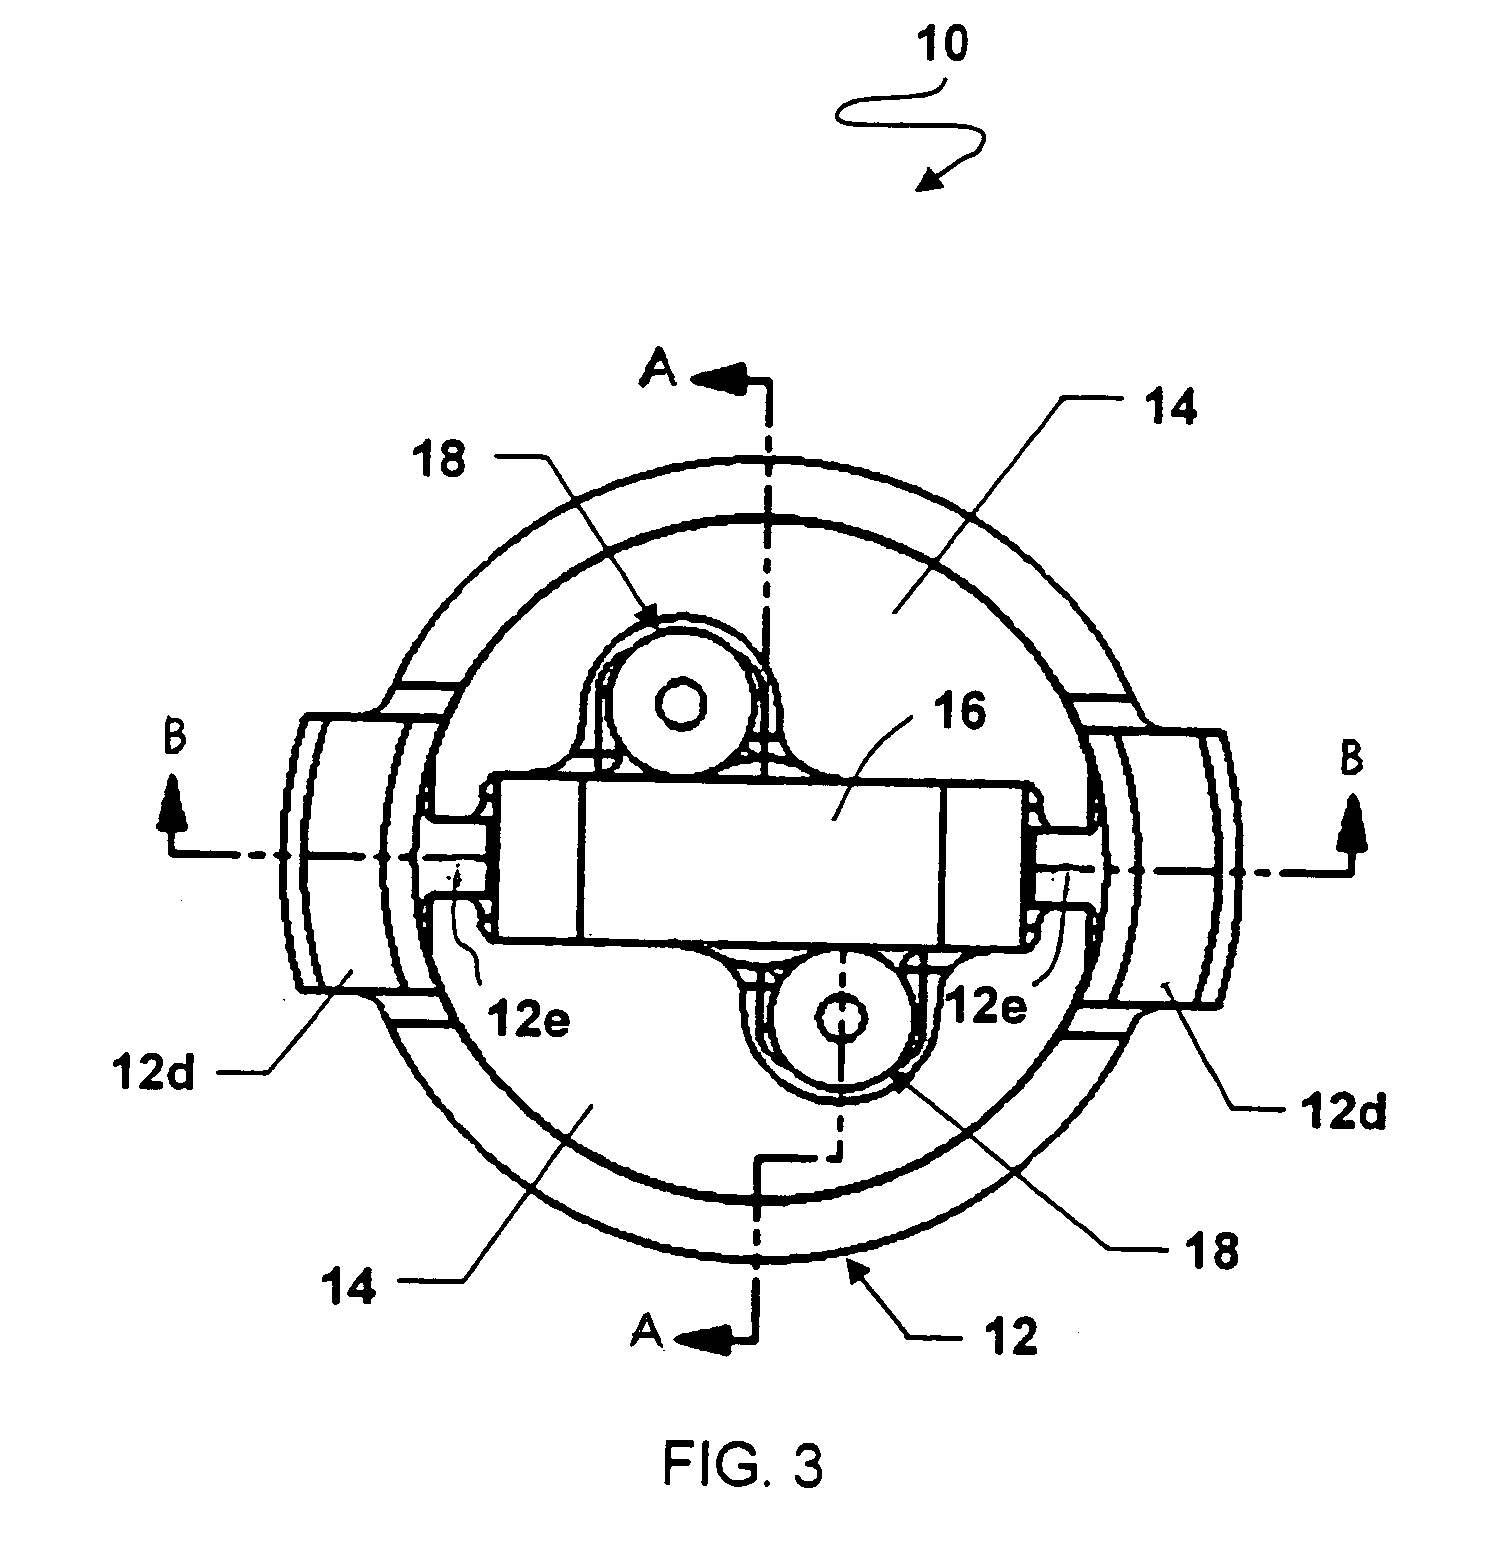 Electrical heater apparatus